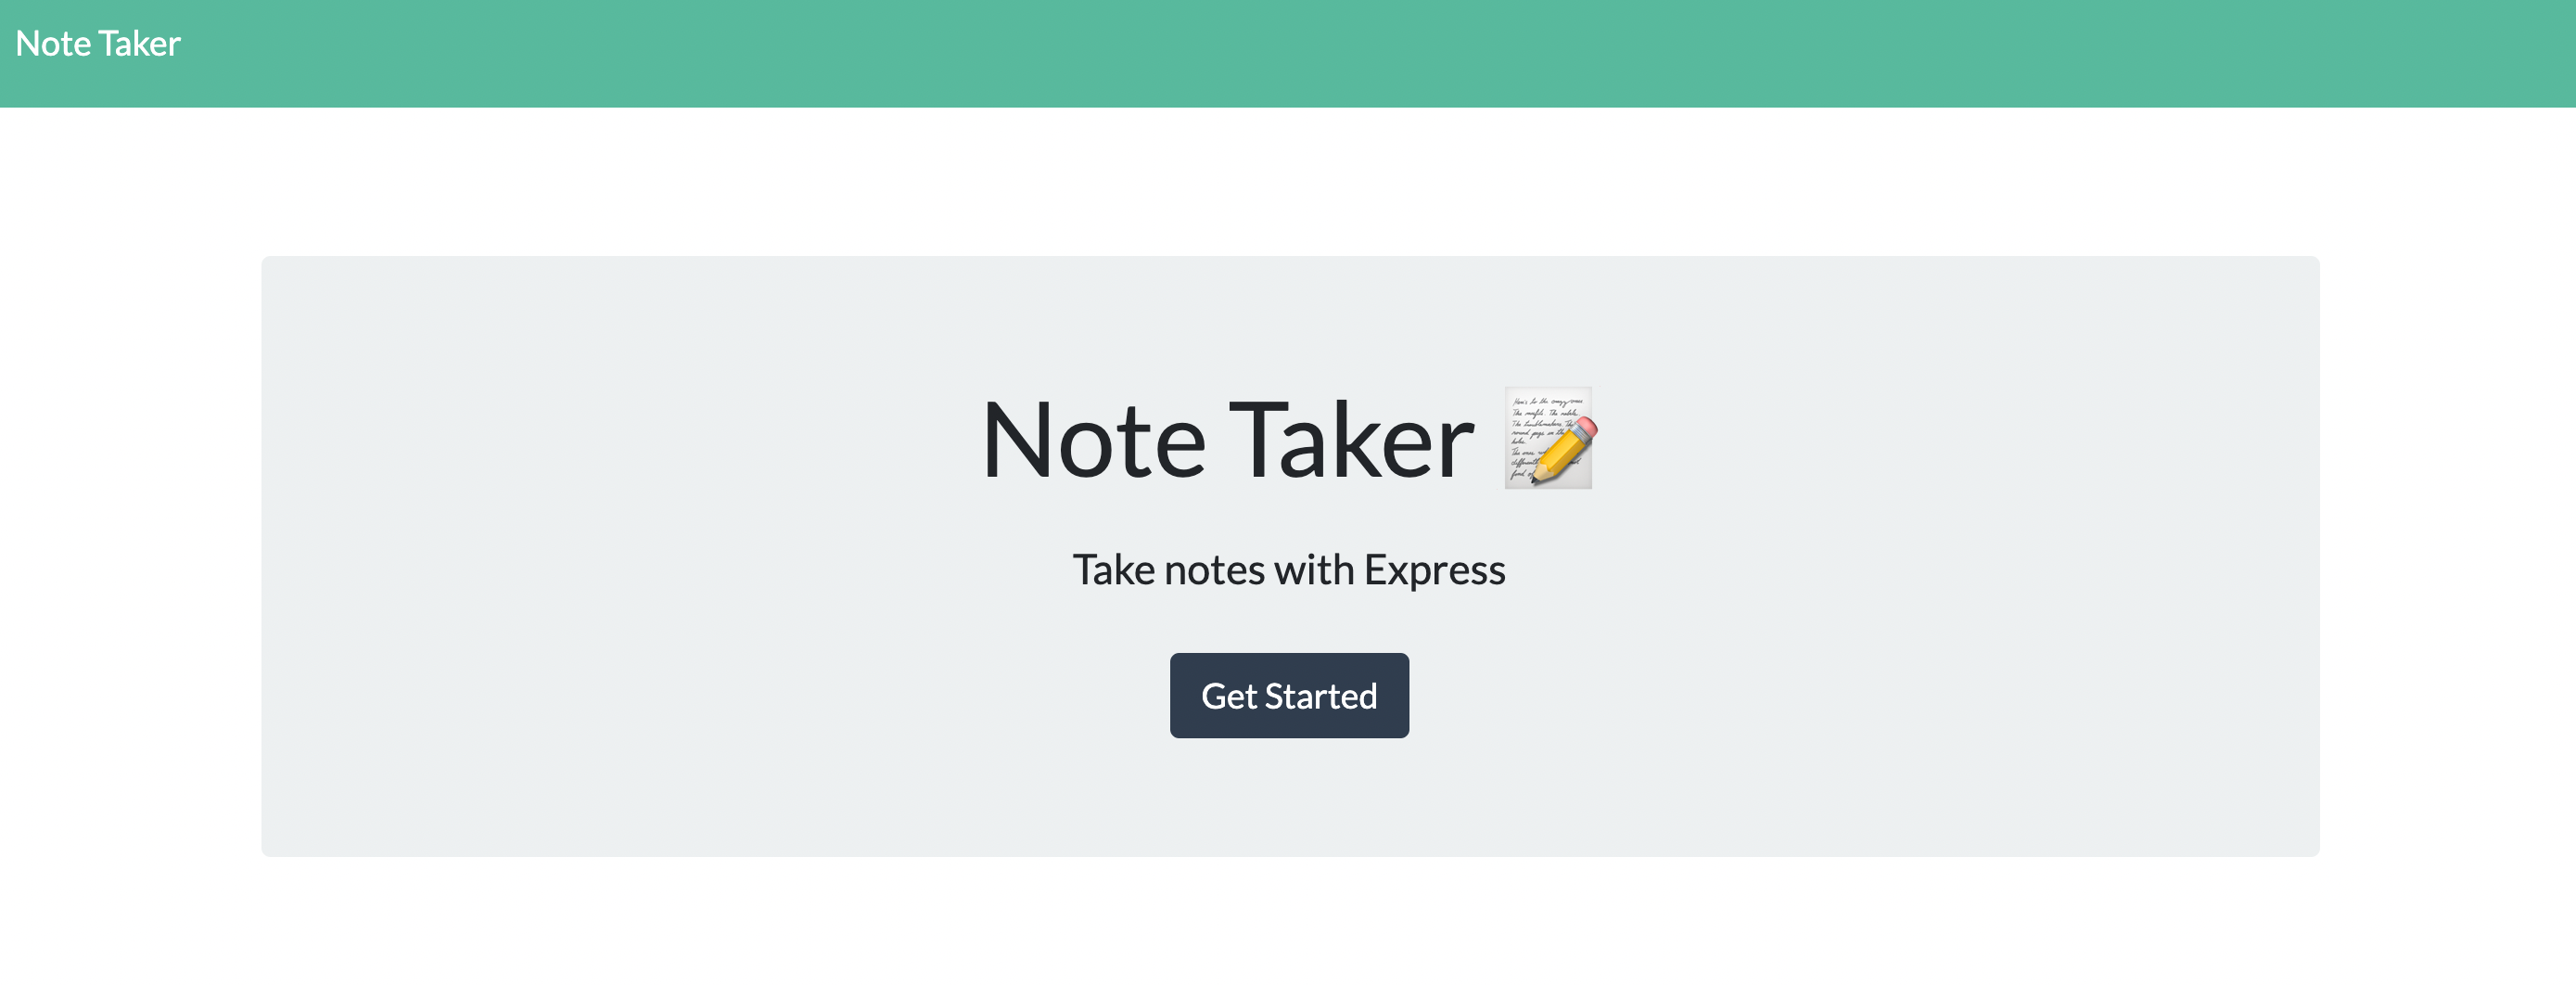 note taker to take notes with express and a get started button